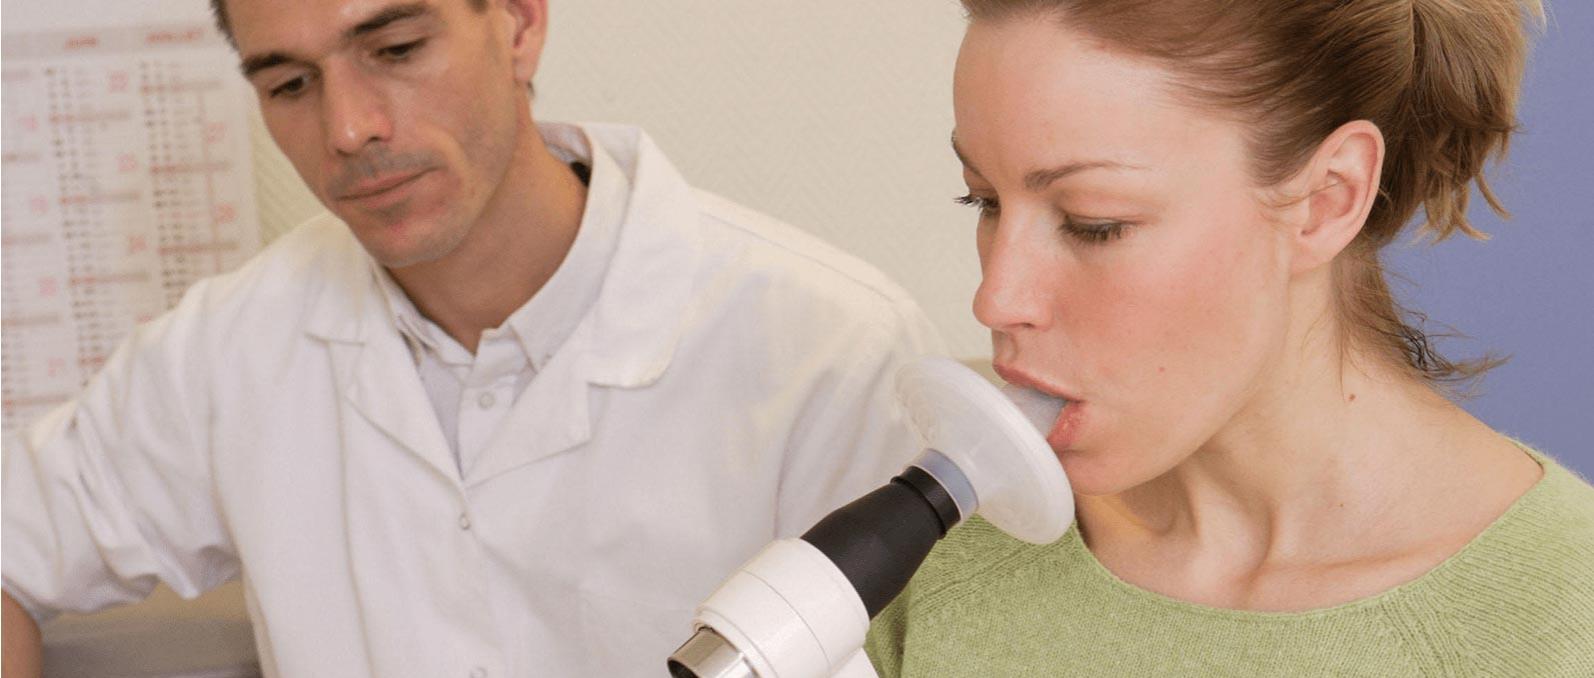 Looking for PFT testing near you, Access Health Care Physicians offer the best spirometry tests in Florida